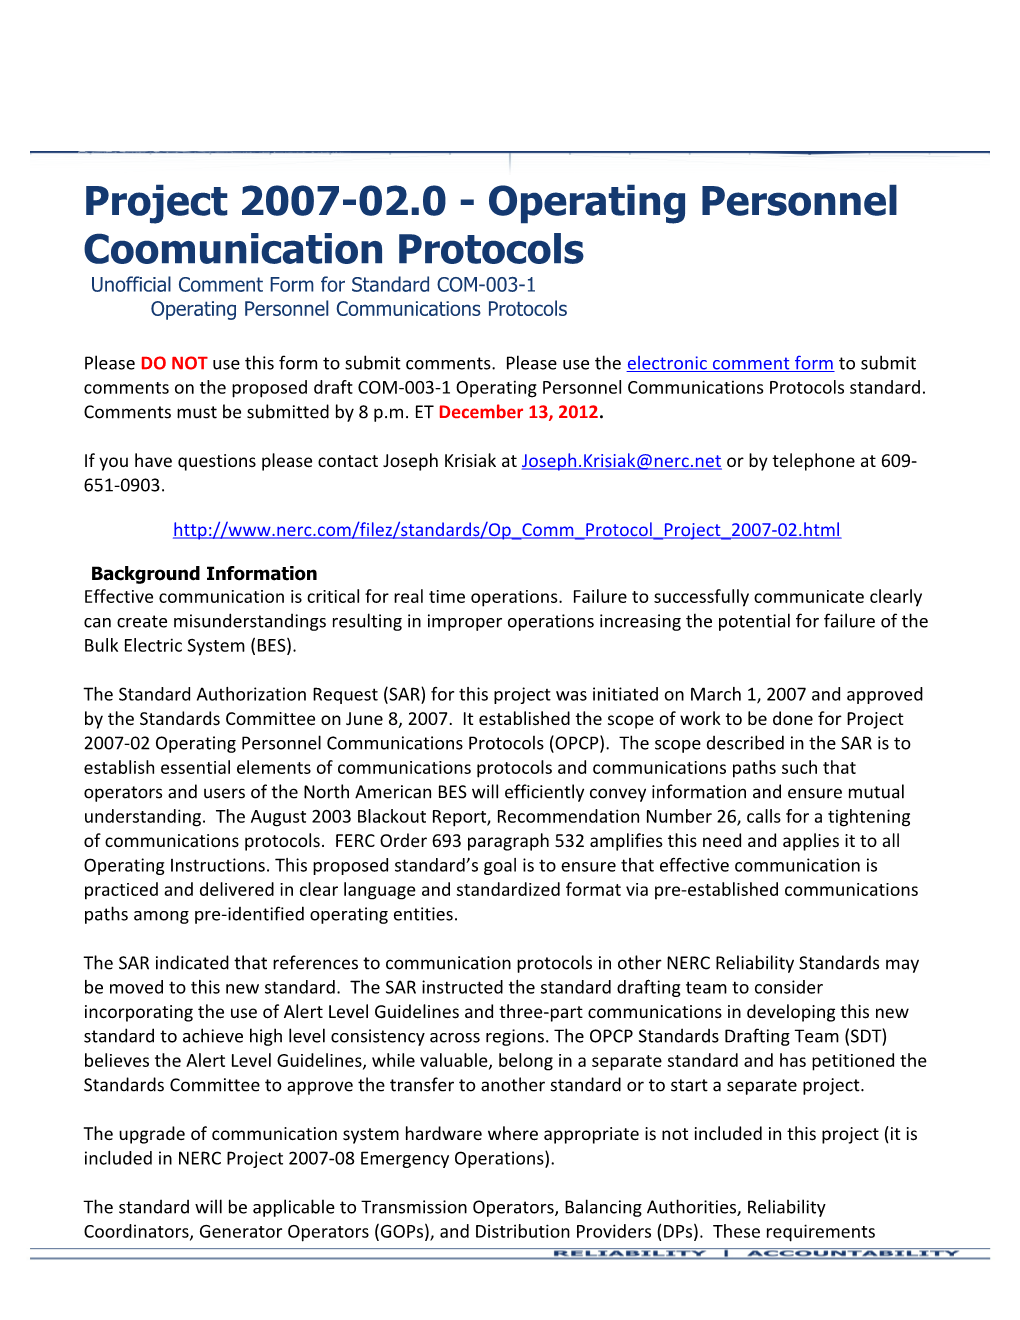 Project 2007-02.0 - Operating Personnel Coomunication Protocols